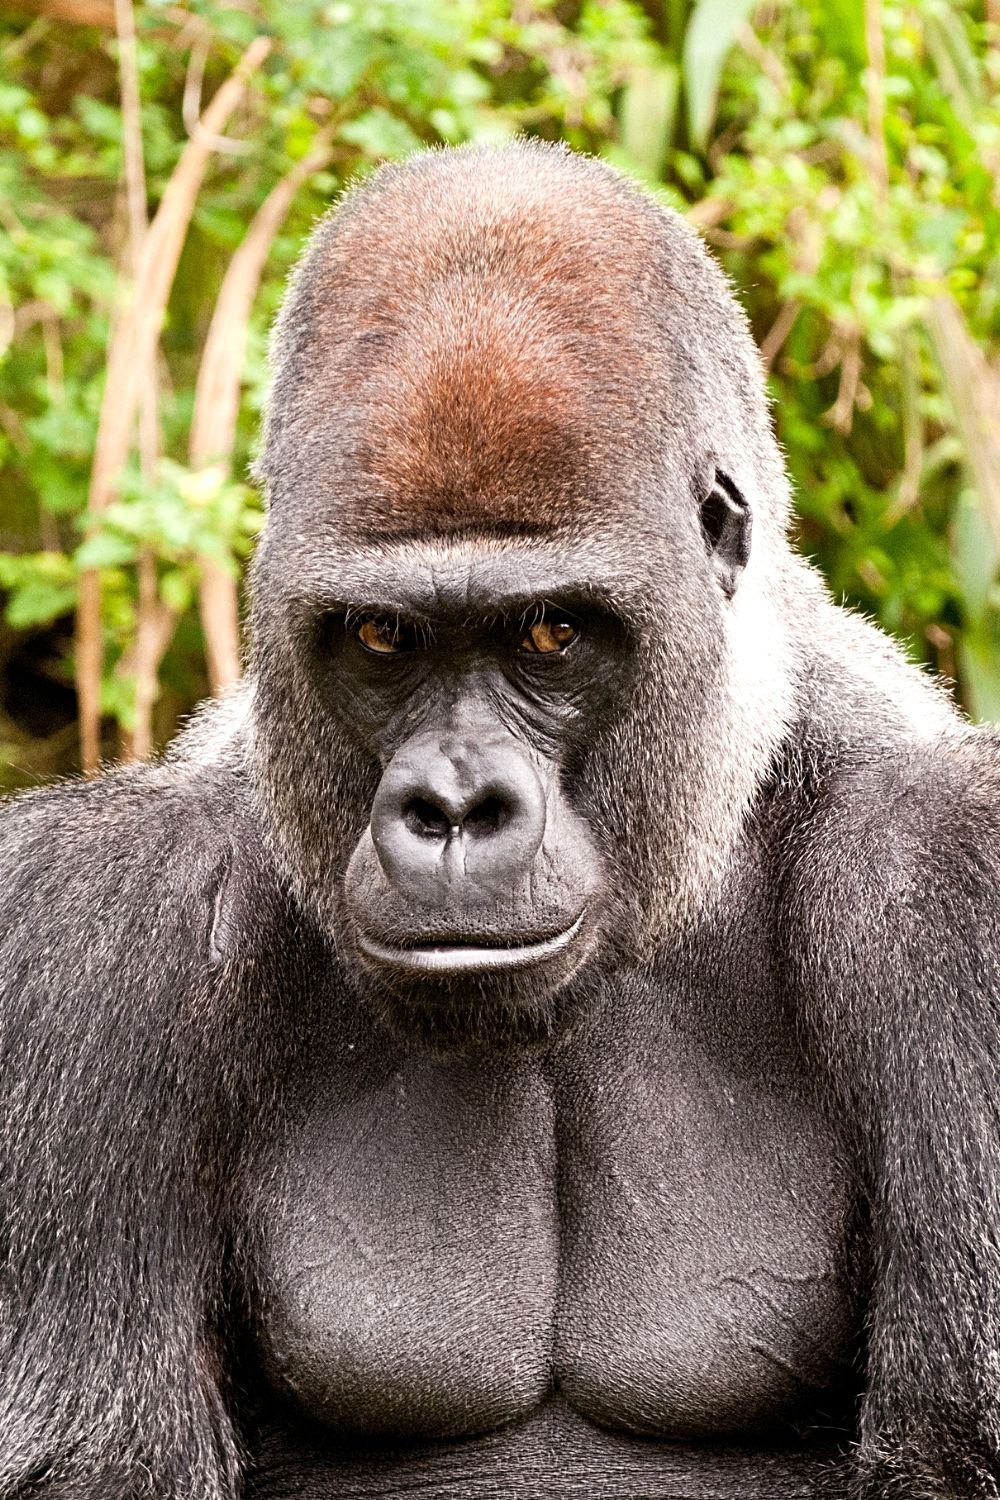 Apes are also other members of the Animal Kingdom that can possibly develop a condition similar to Down Syndrome